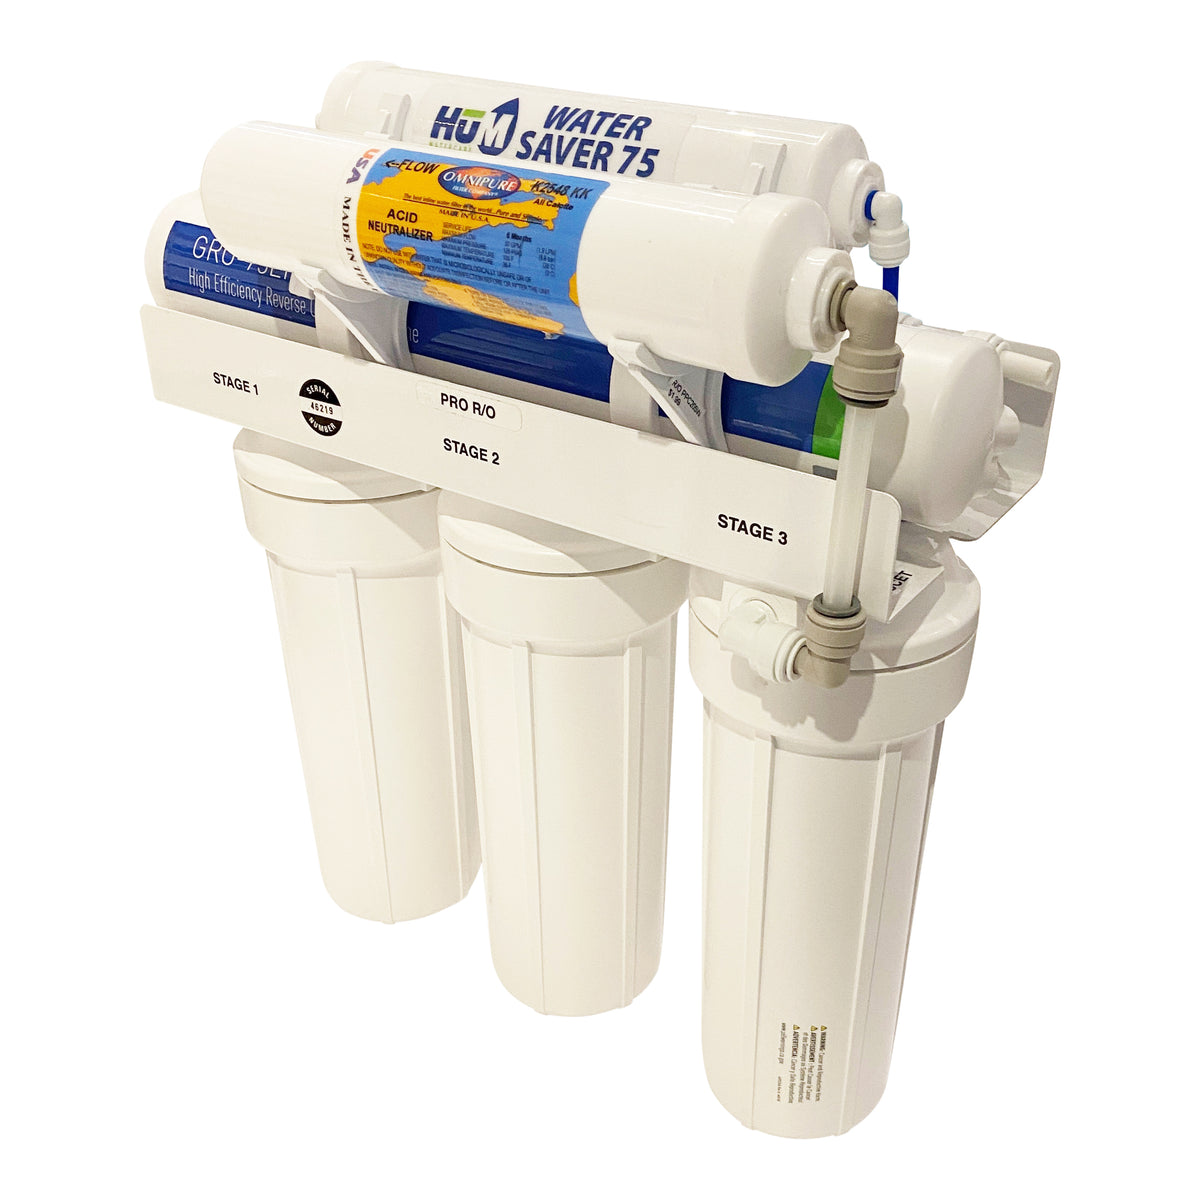 HUM Water Care 75 Reverse Osmosis Remineralization Kit